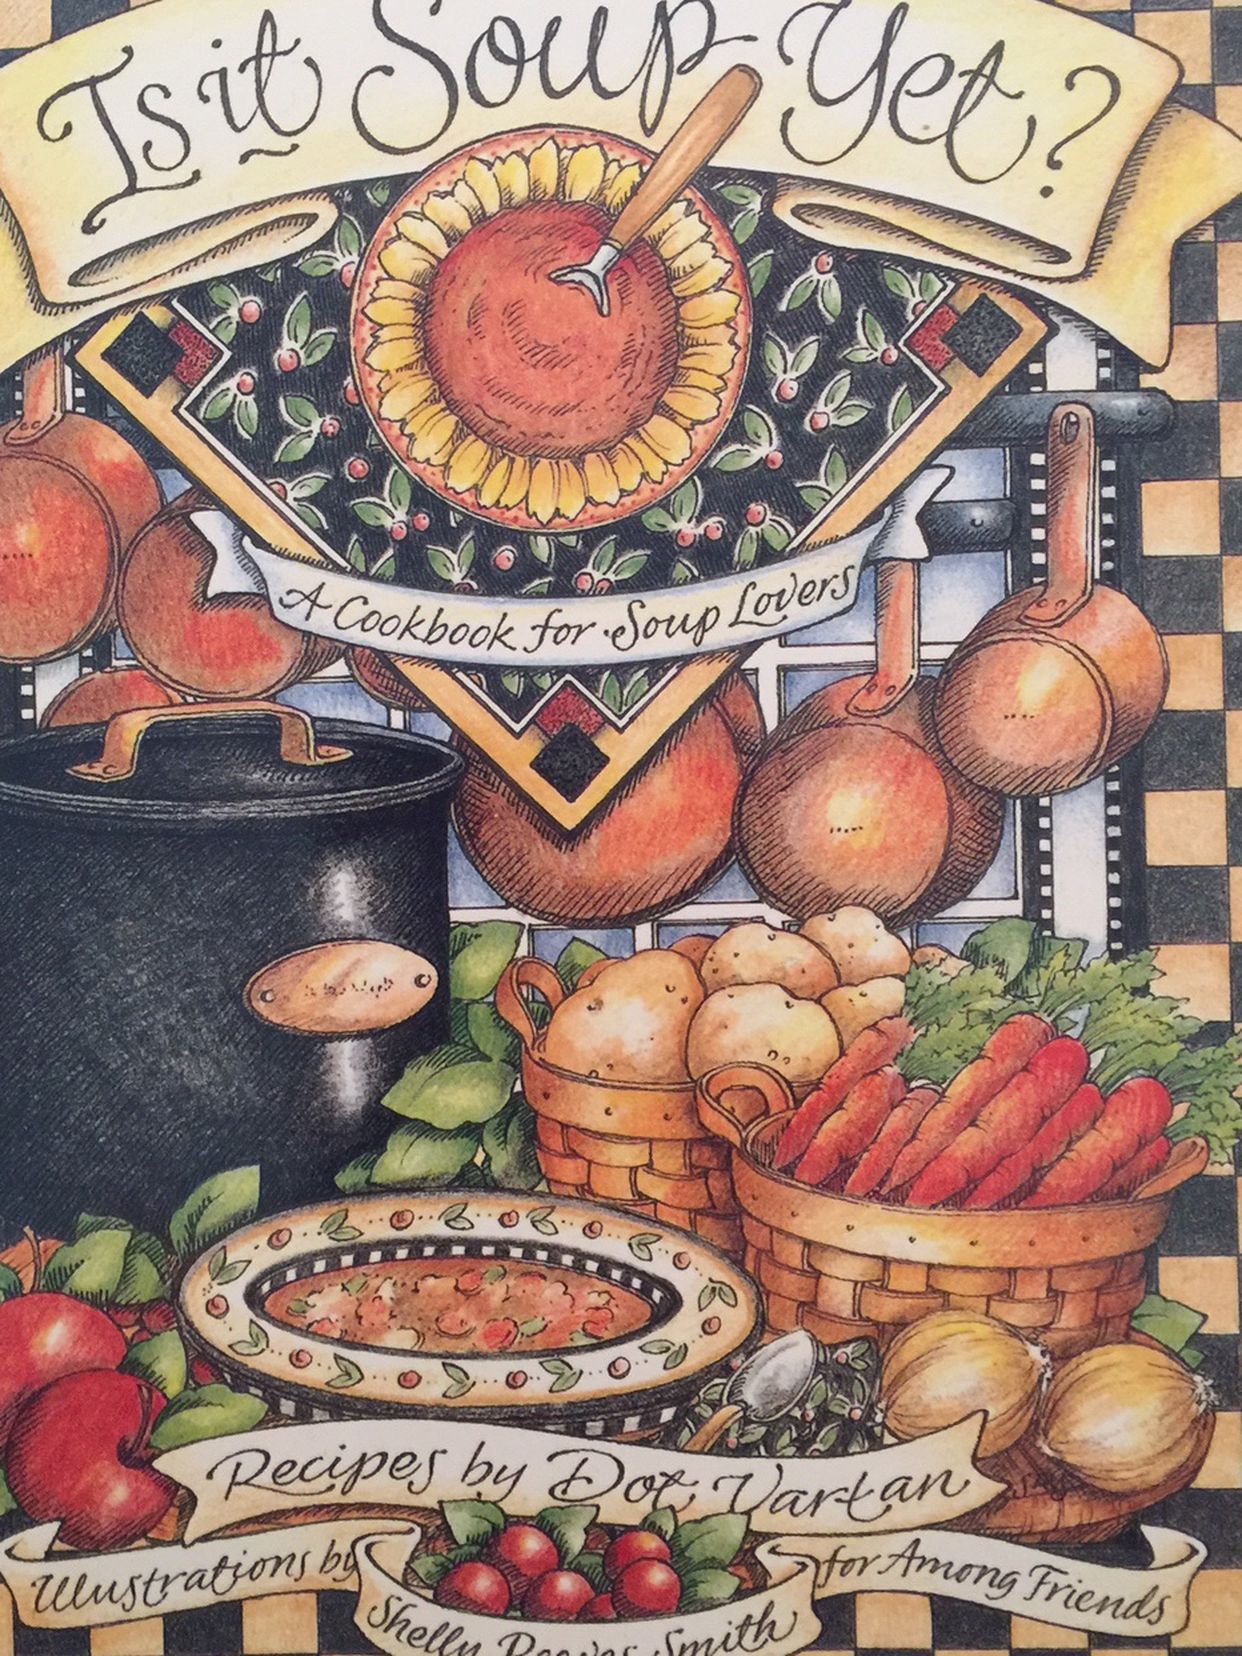 Cook book-“Is it soup yet?” A cookbook for soup lovers, recipes by Dot Vartan